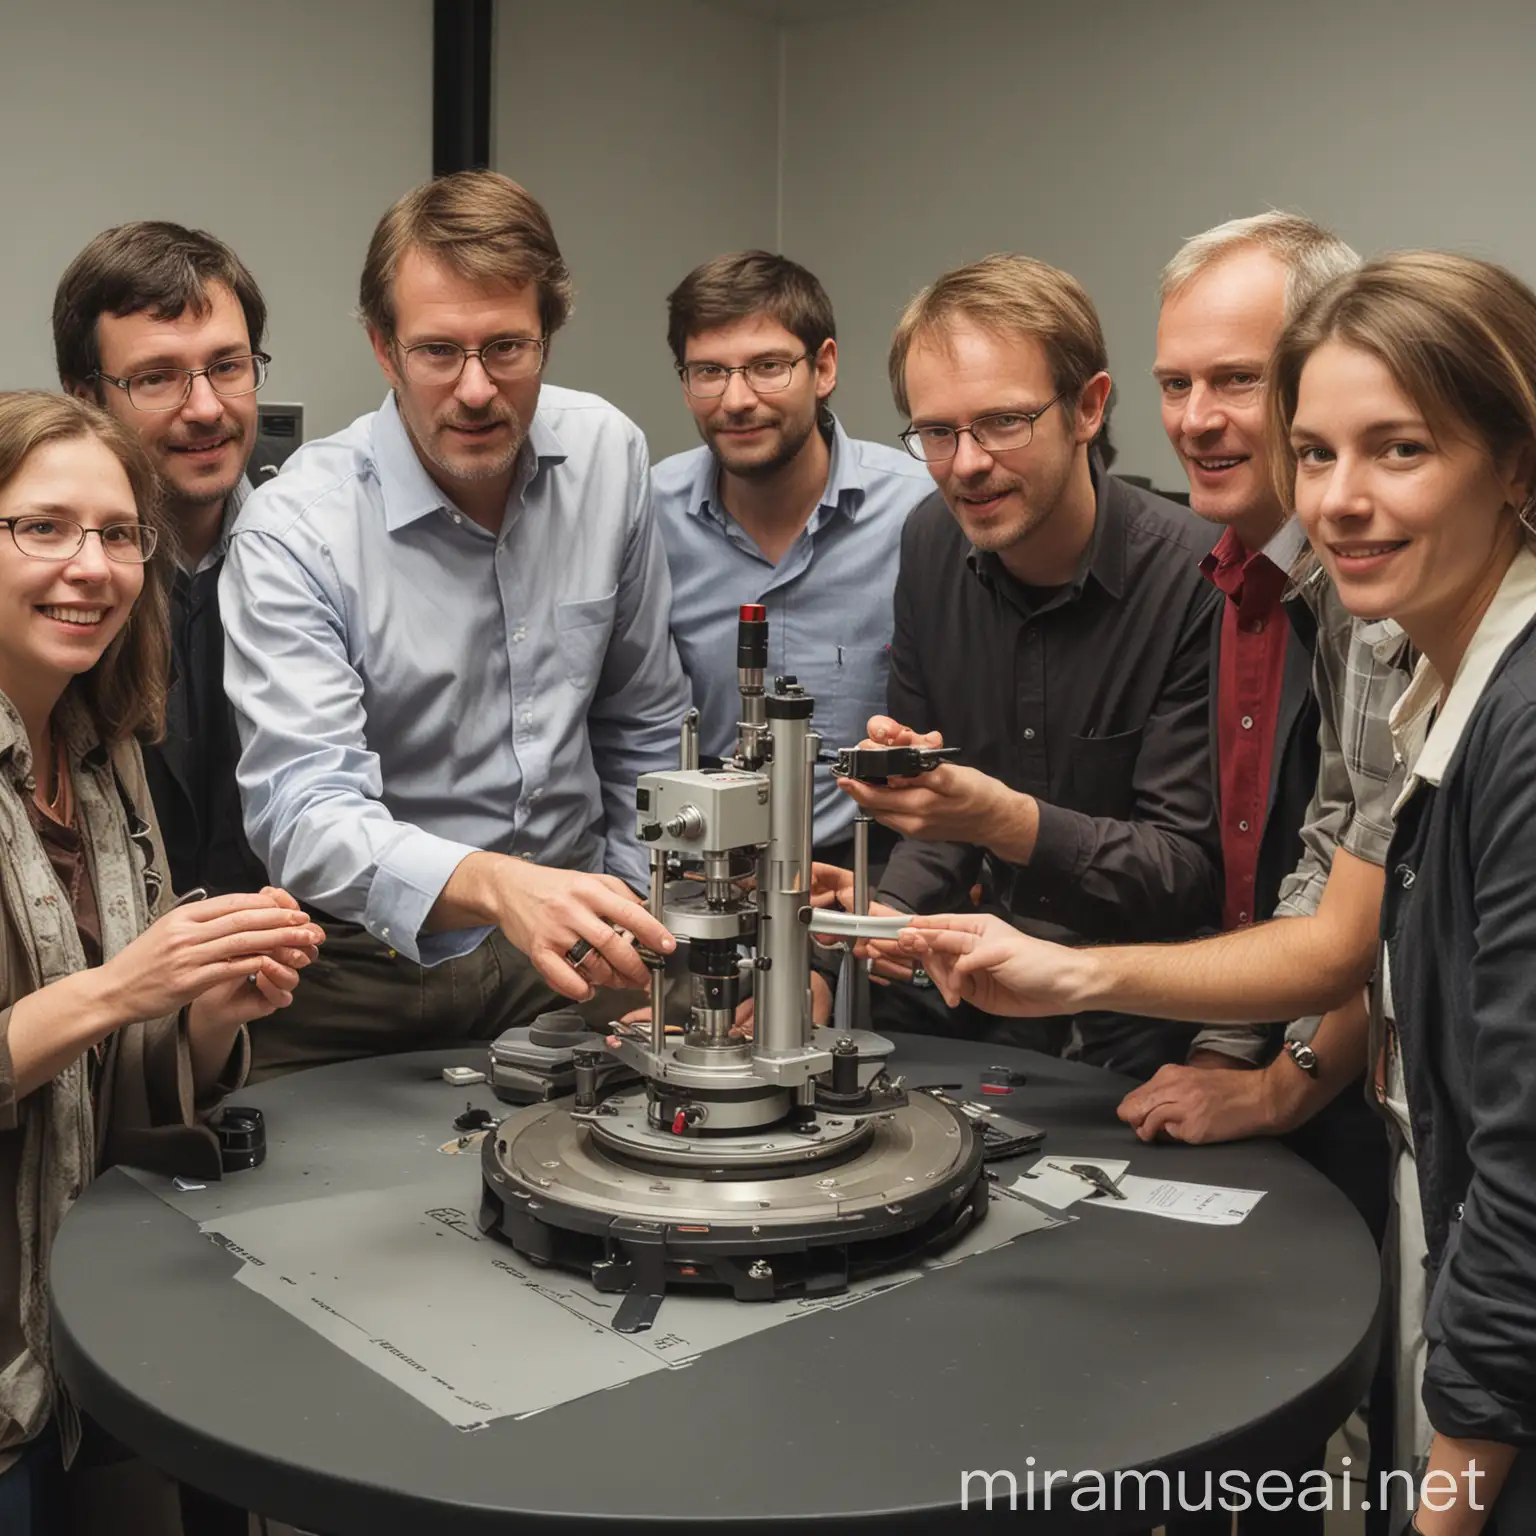 a rheology seminar, make a picture with some participants around an Anton Paar rheometer during a hands-on session

